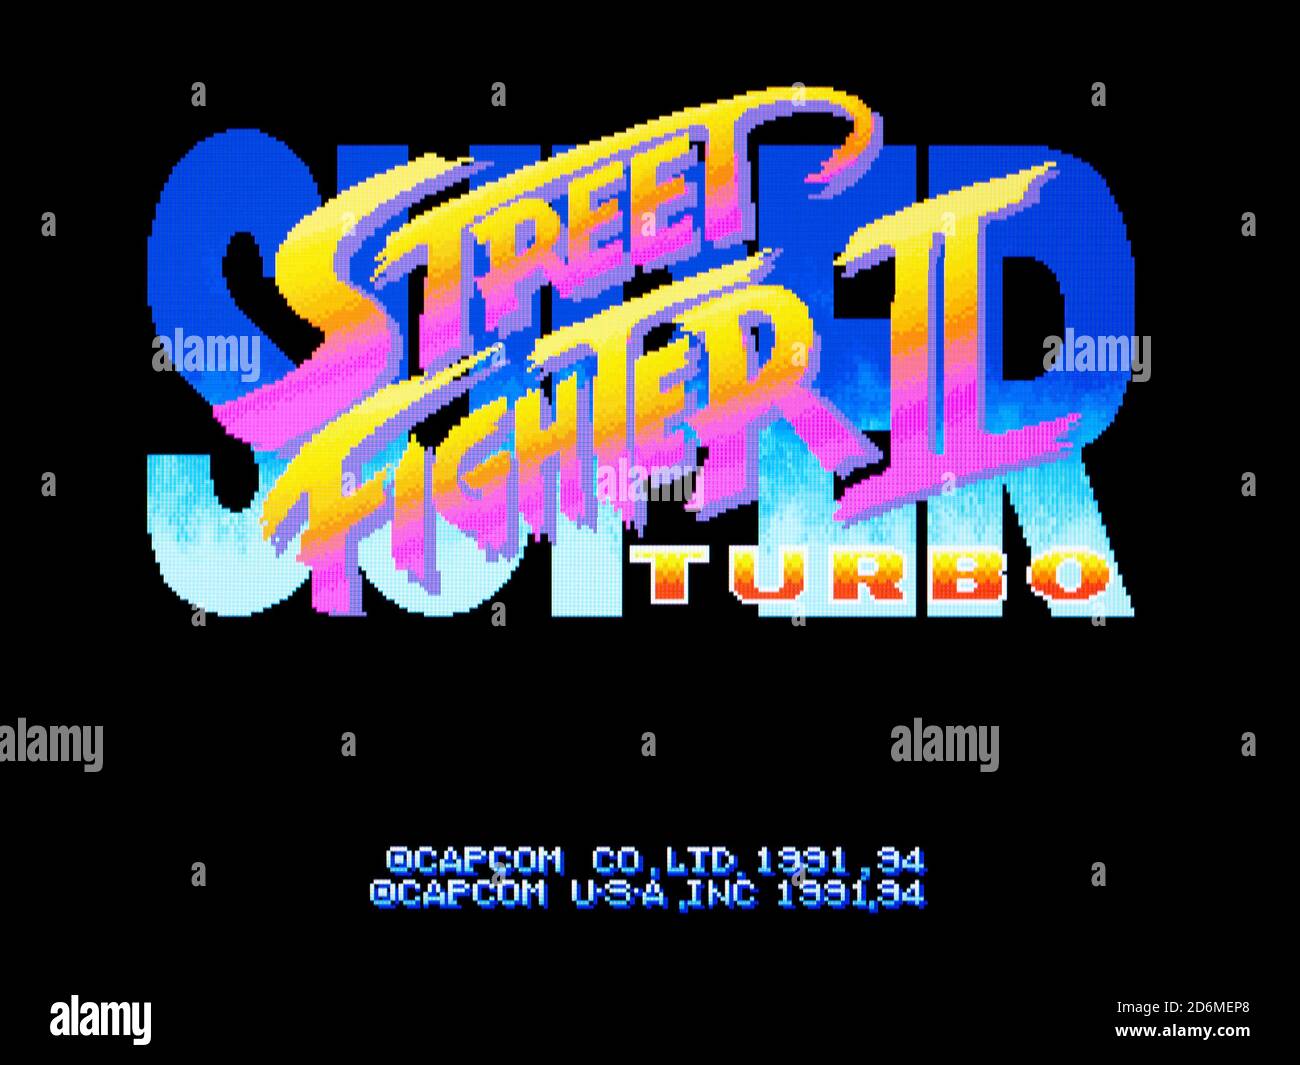 Street Fighter II Turbo - 3DO Interactive Multiplayer Videogame - Editorial Use Only Stock Photo